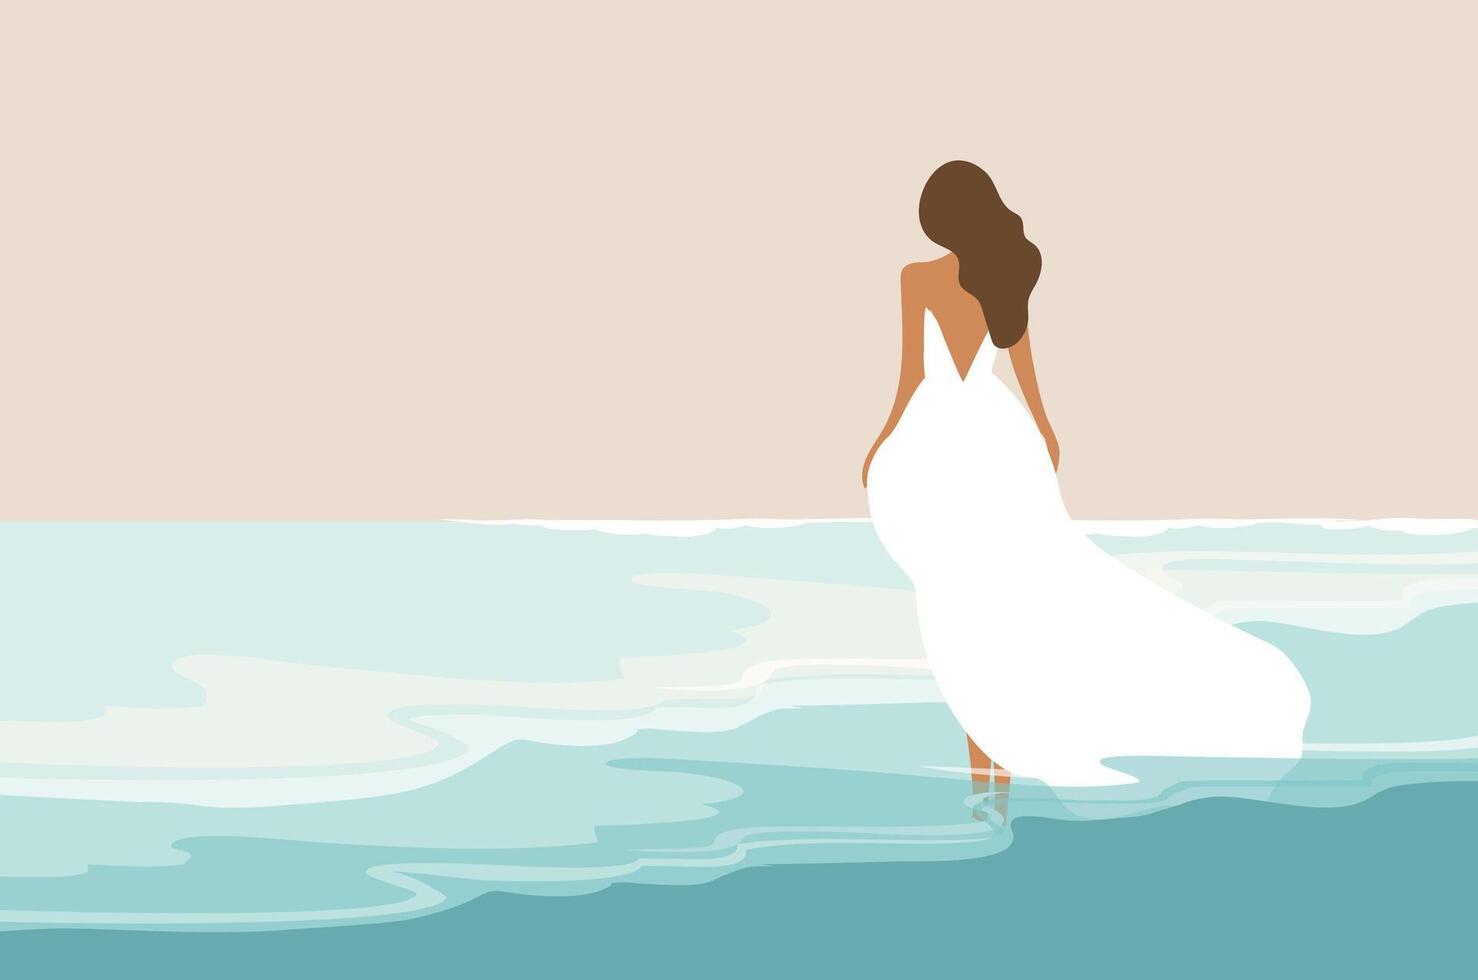 Beautiful woman in white dress on the beach illustration. Summer holidays beach concept vector